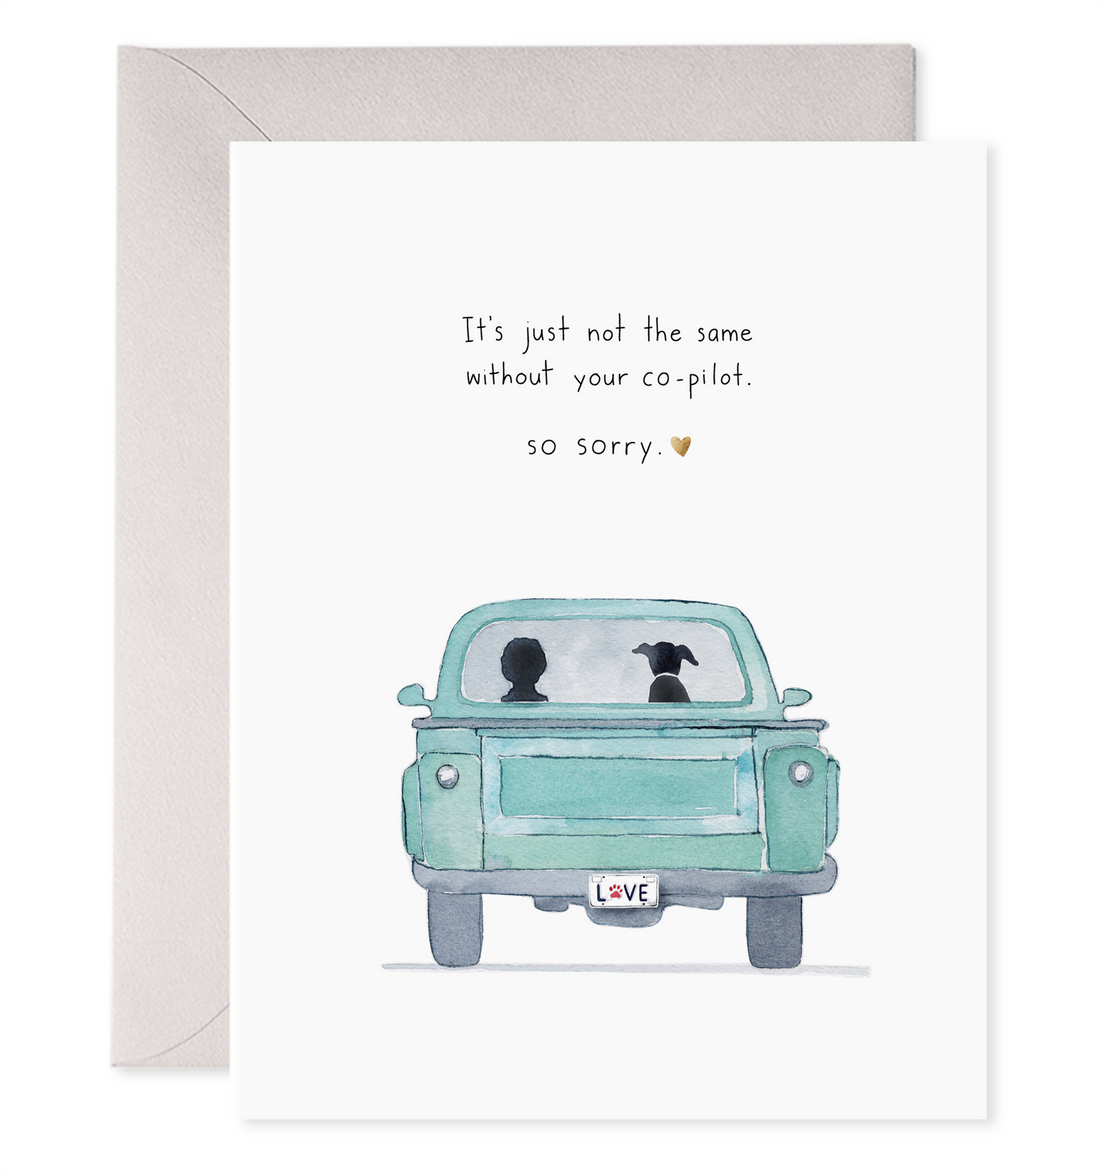 A Co-Pilot Dog Greeting Card featuring a watercolor painting of a blue truck with a dog looking out of the rear window and a message about missing a co-pilot from E. Frances.